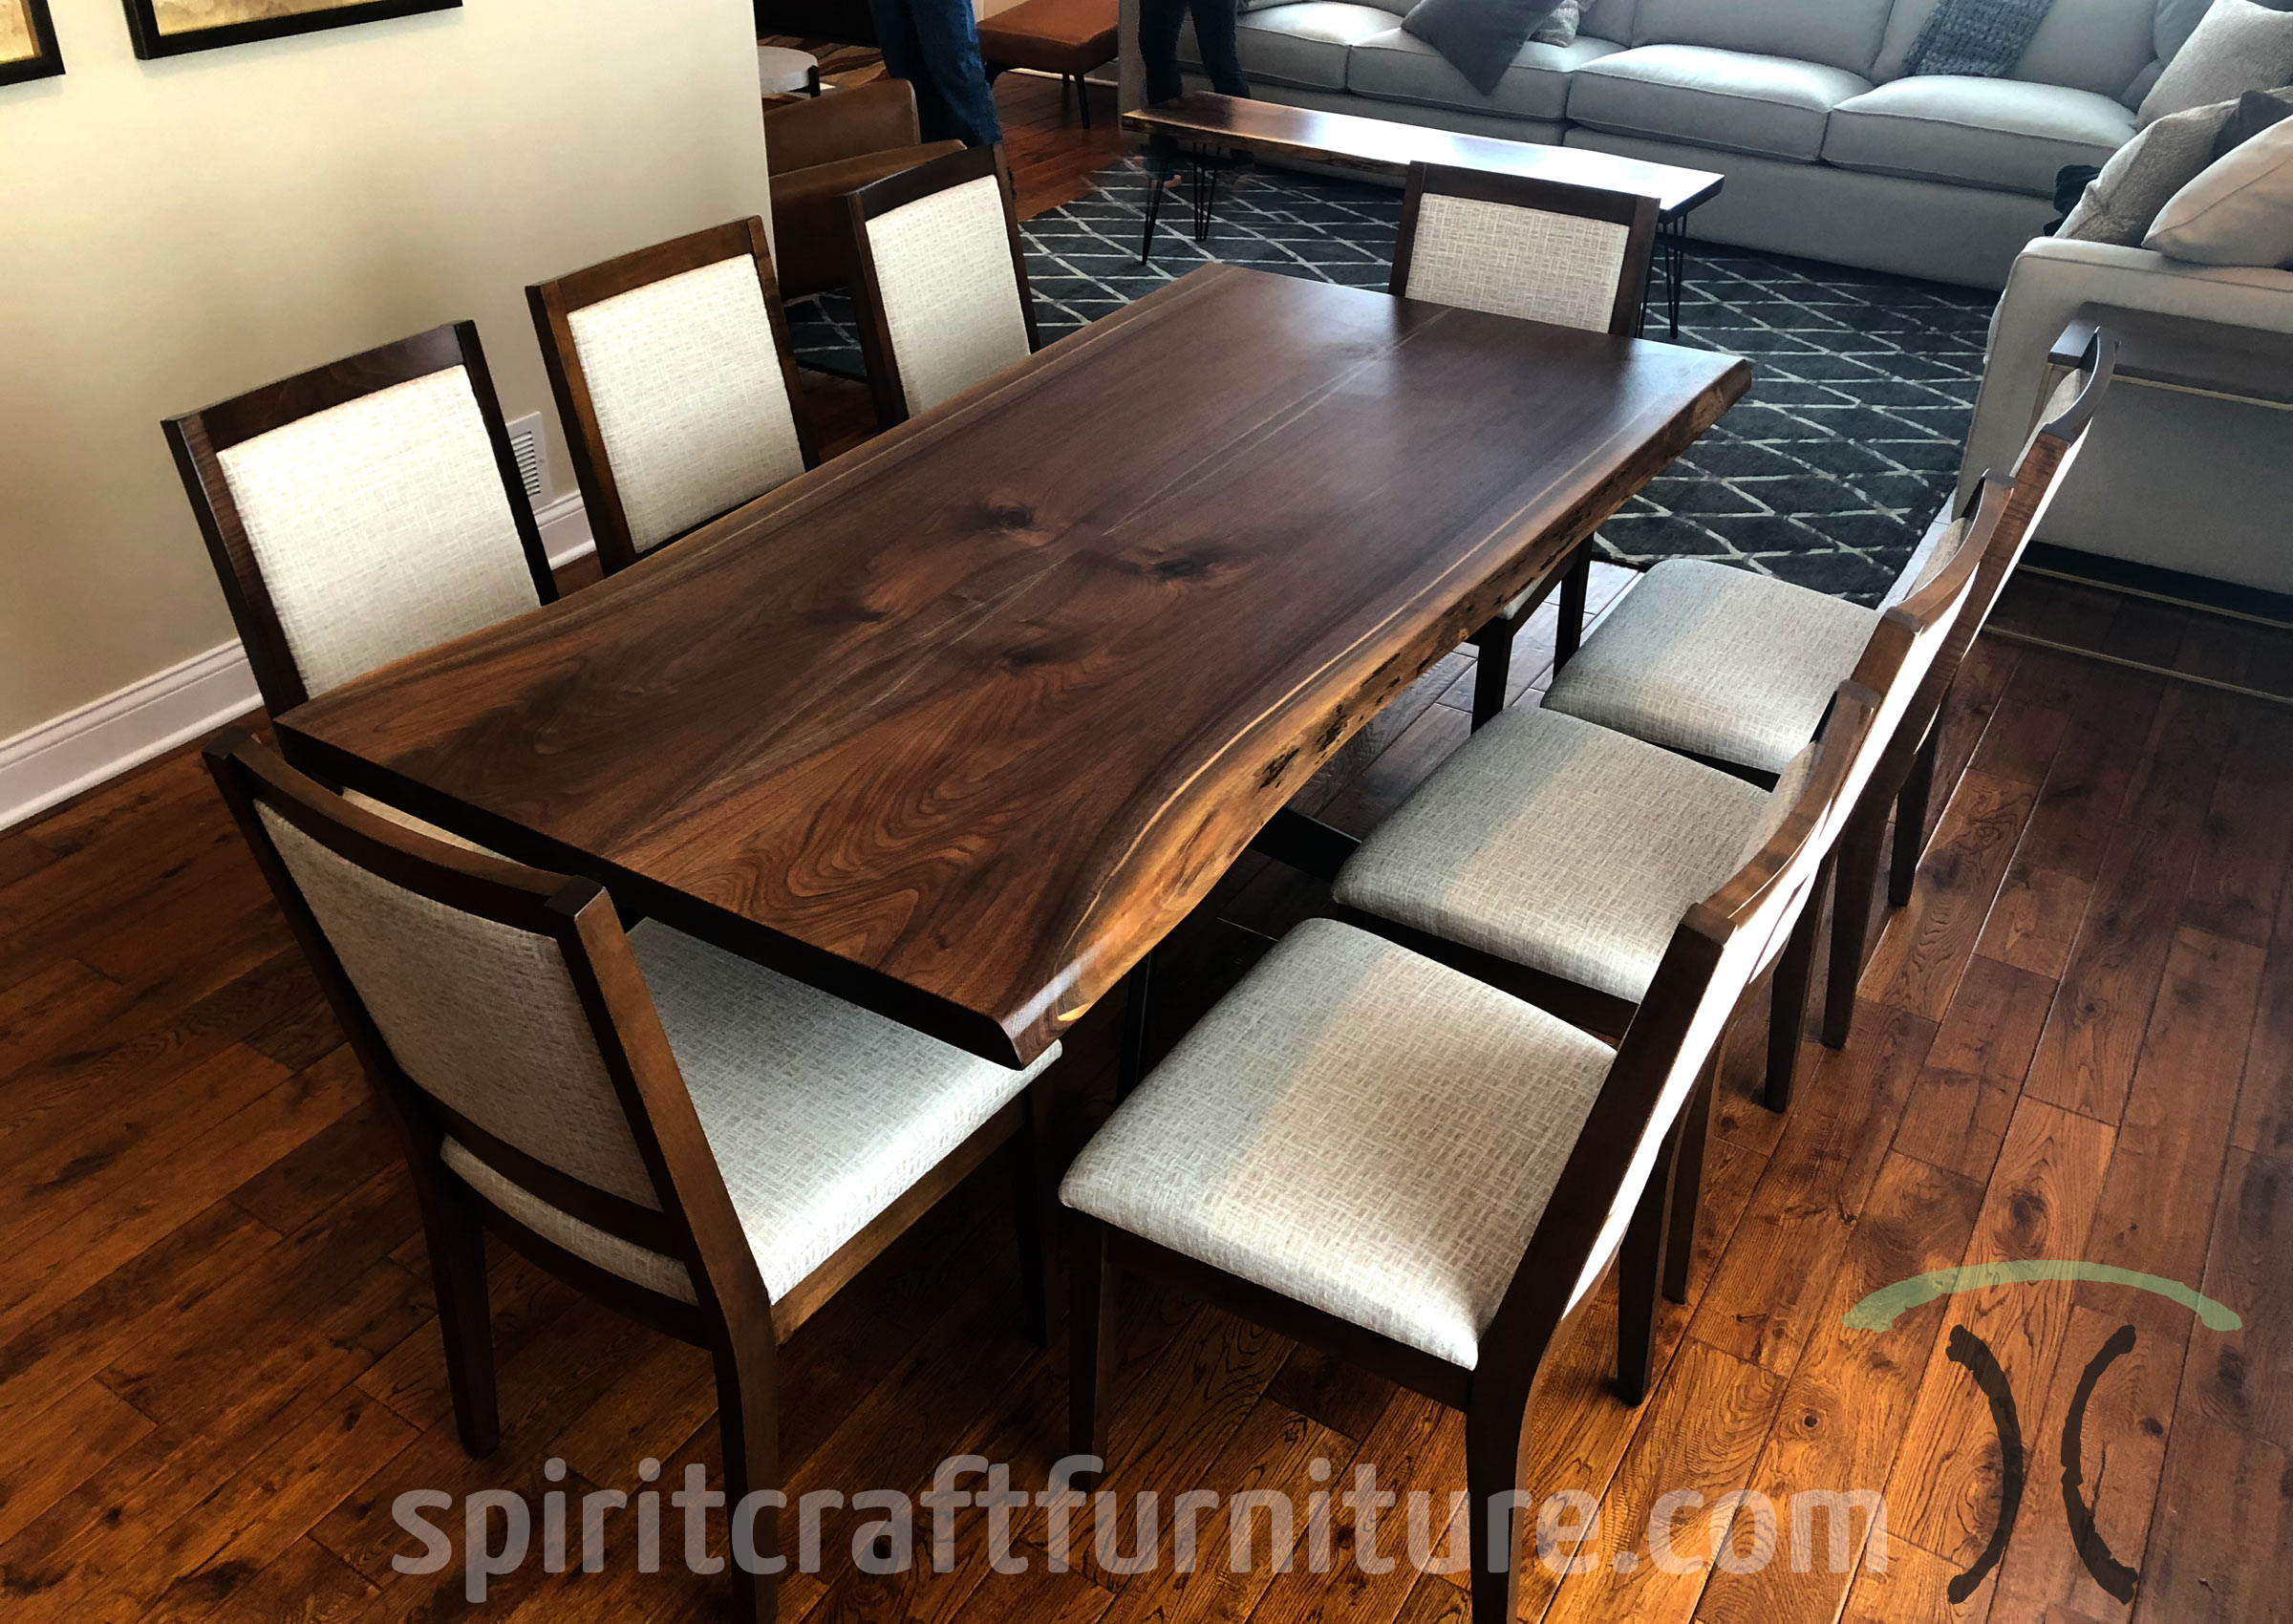 Live Edge Dining Tables Custom, Unfinished Wood Dining Room Table And Chairs